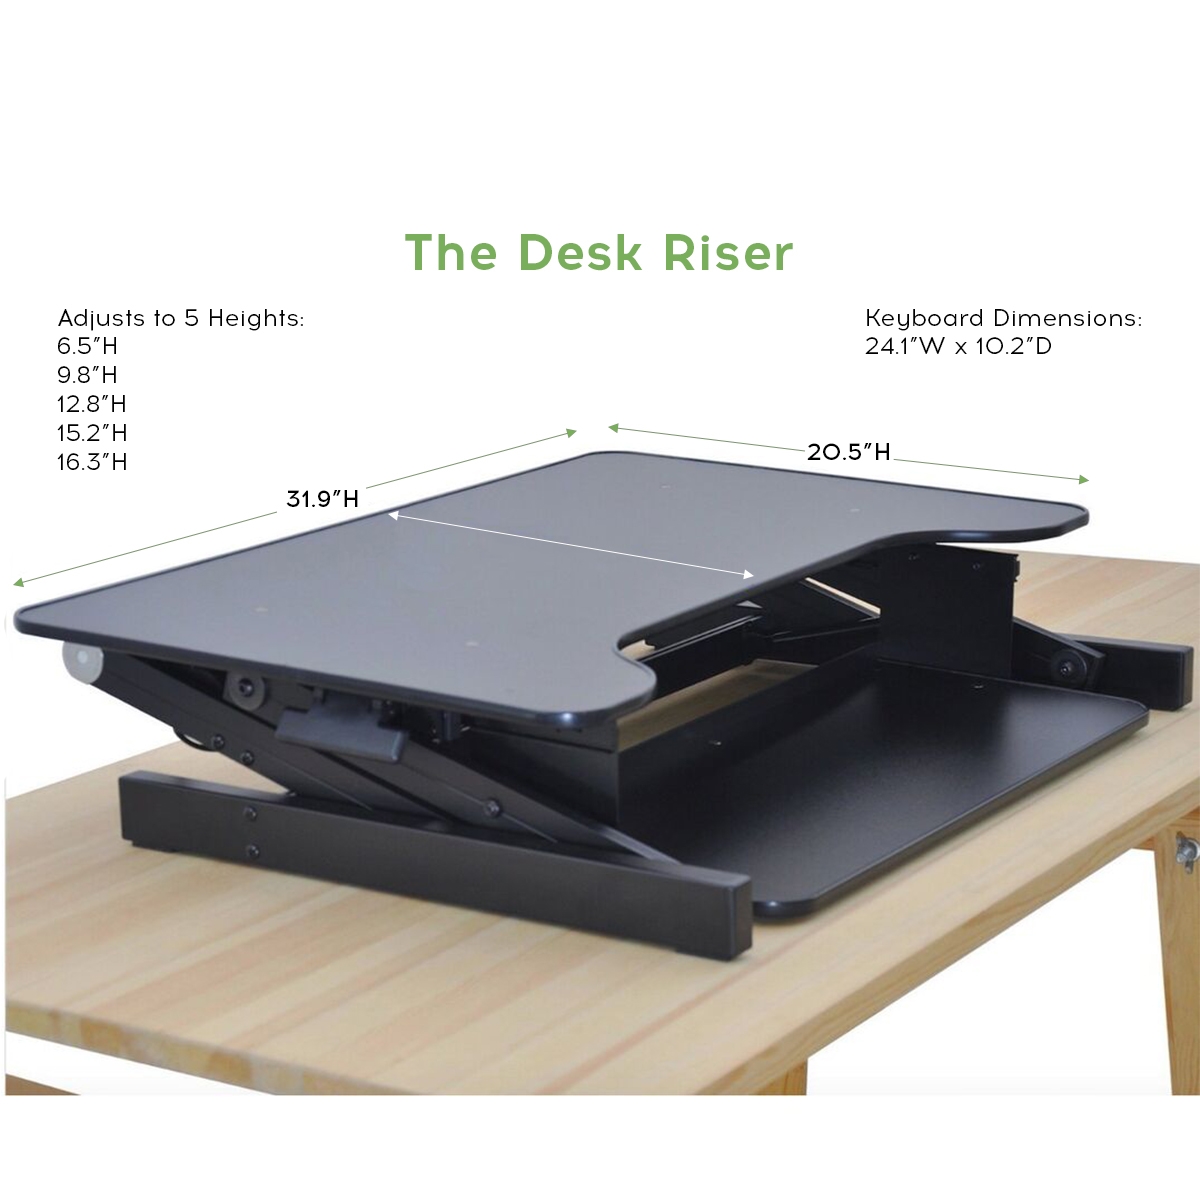 Standing Desk - the DeskRiser - Height Adjustable | Heavy Duty sit to stand  office desk. Supports up to 50 Lbs 32" Wide Sit Stand up Desk Converter